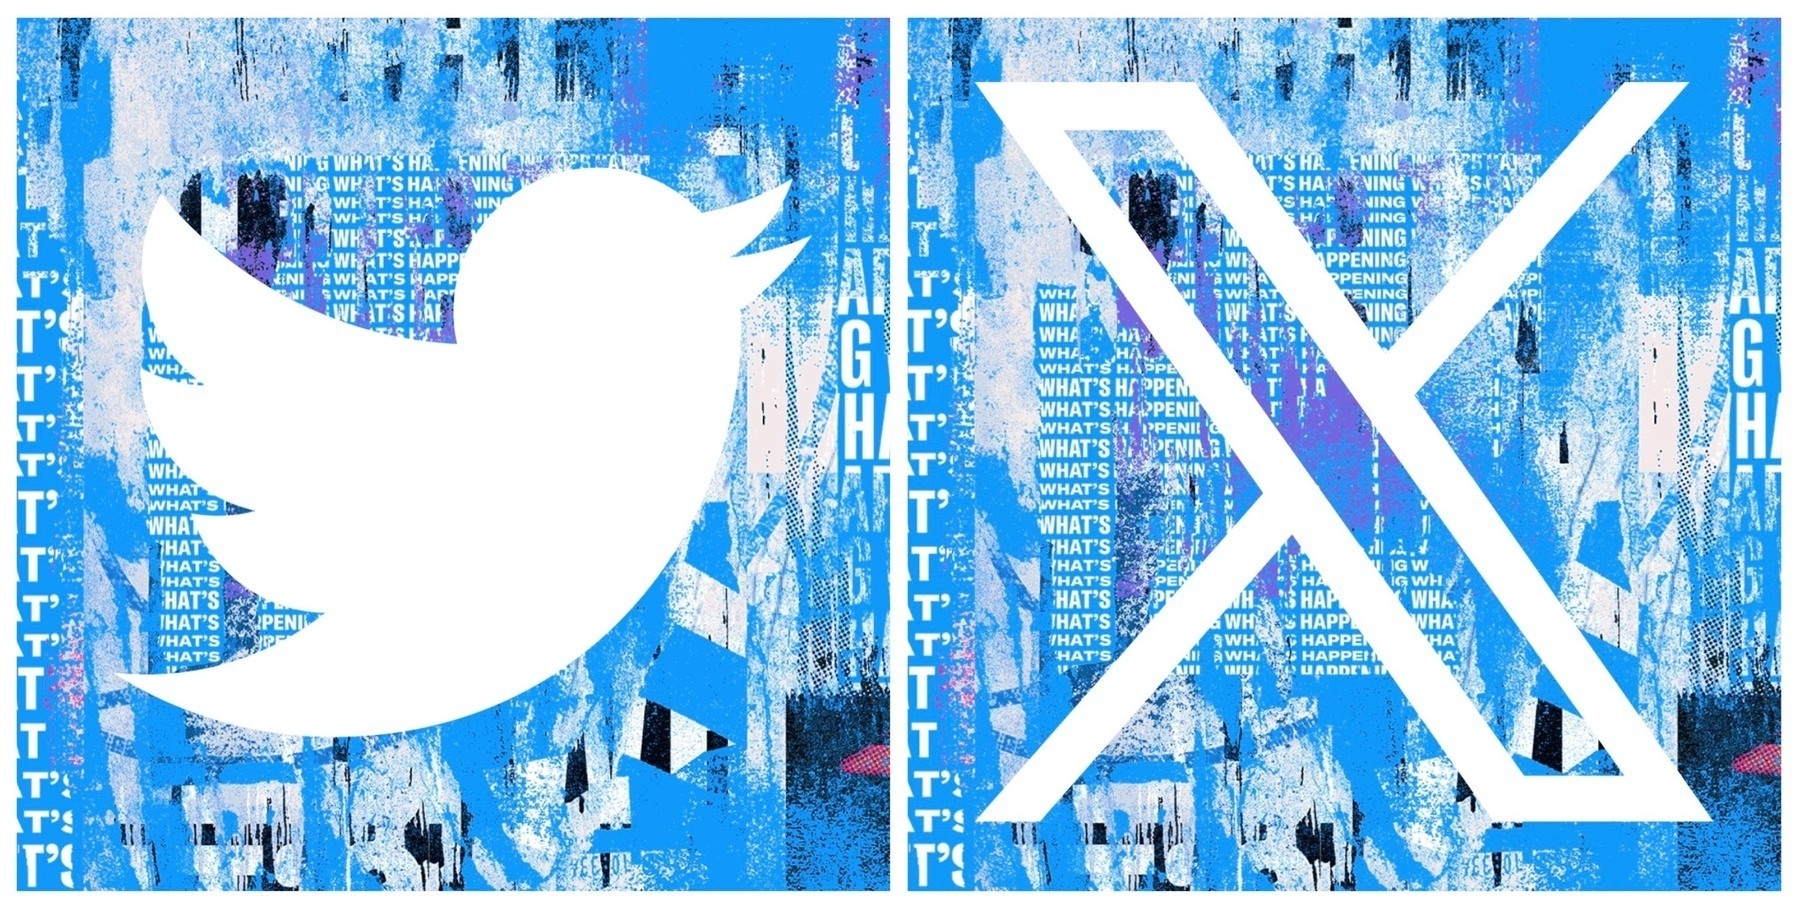 Old and new Twitter logos beside one another on Twitter's "what's happening" background